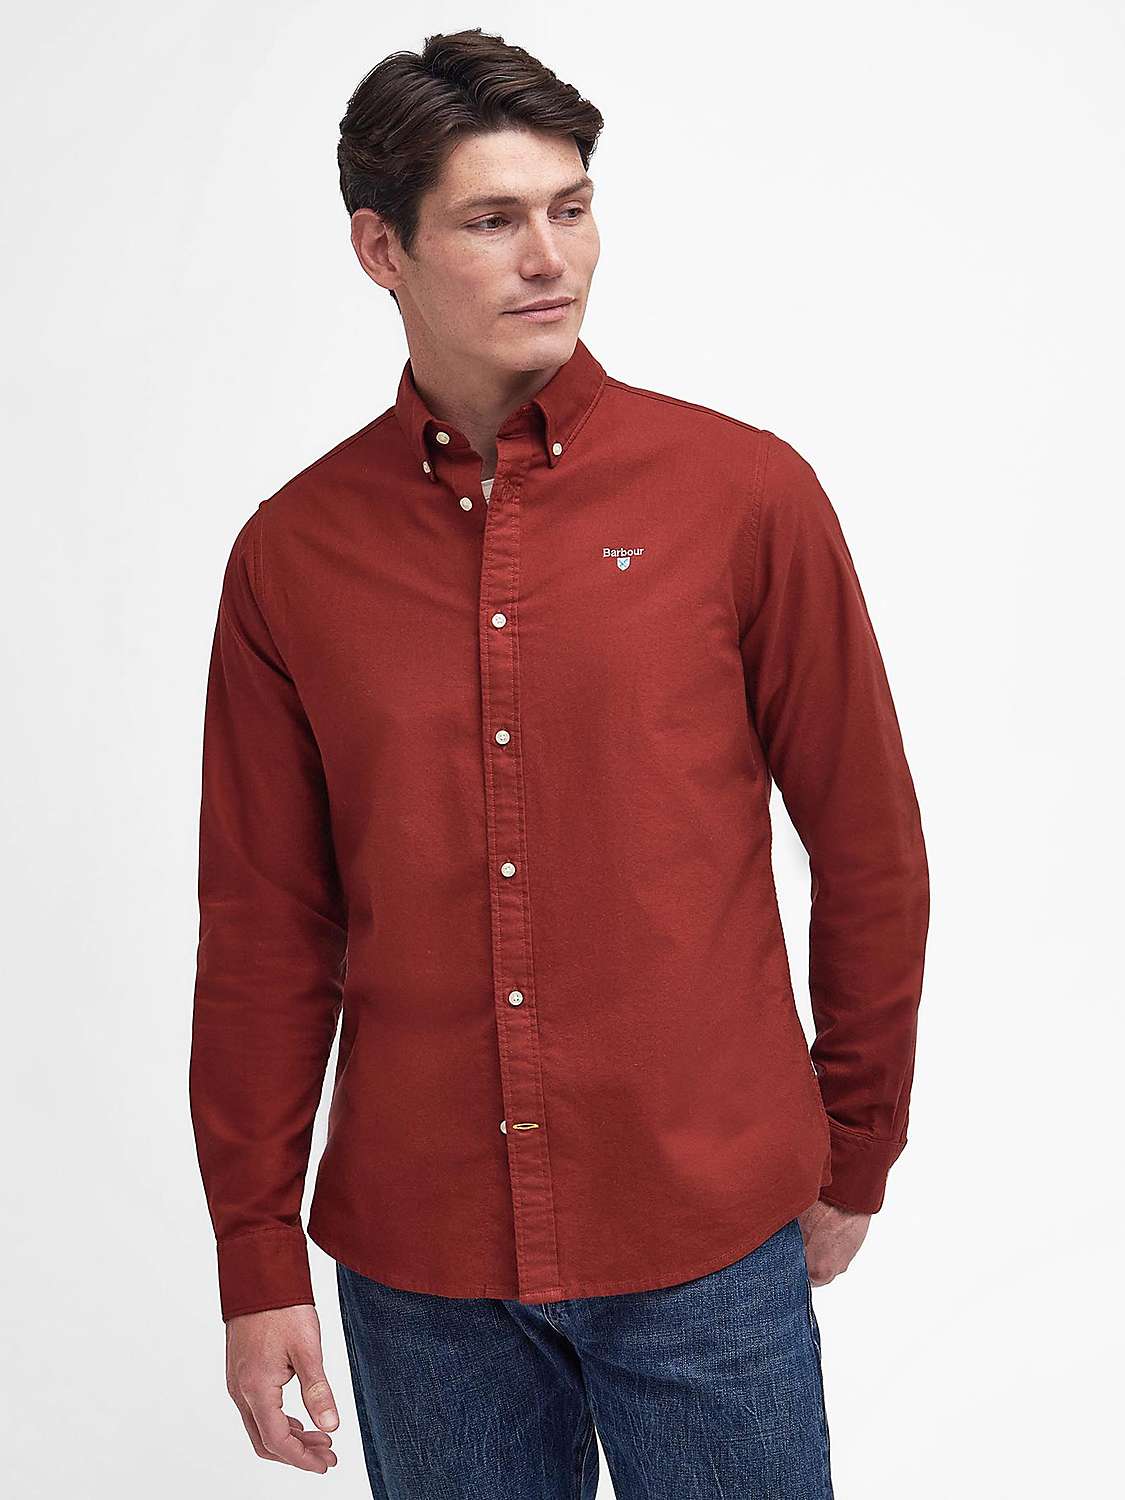 Buy Barbour Tailored Fit Oxford Shirt Online at johnlewis.com